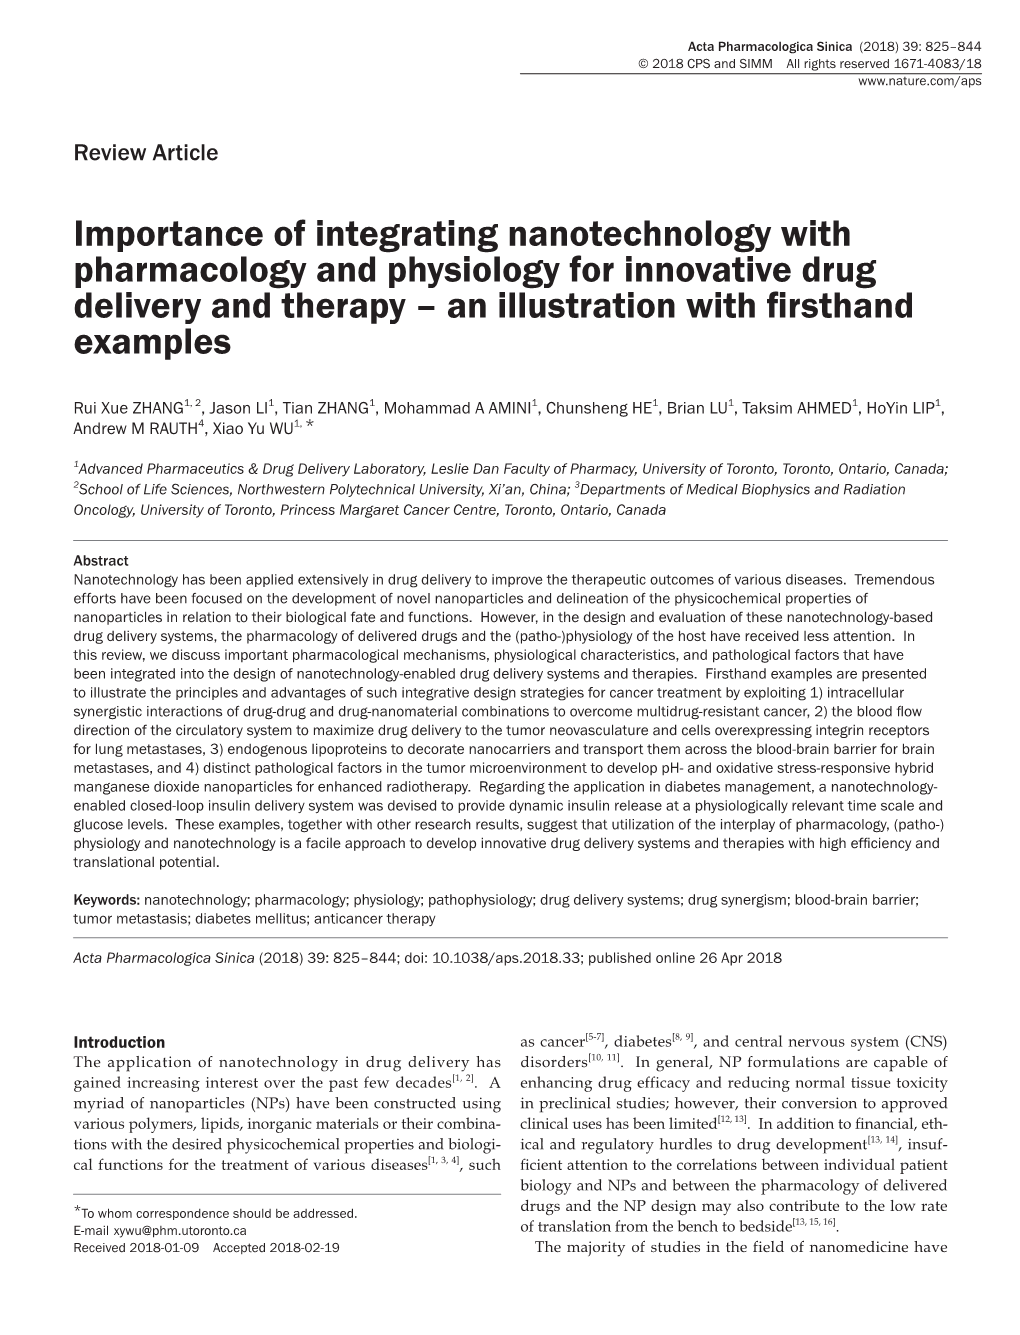 Importance of Integrating Nanotechnology with Pharmacology and Physiology for Innovative Drug Delivery and Therapy – an Illustration with Firsthand Examples